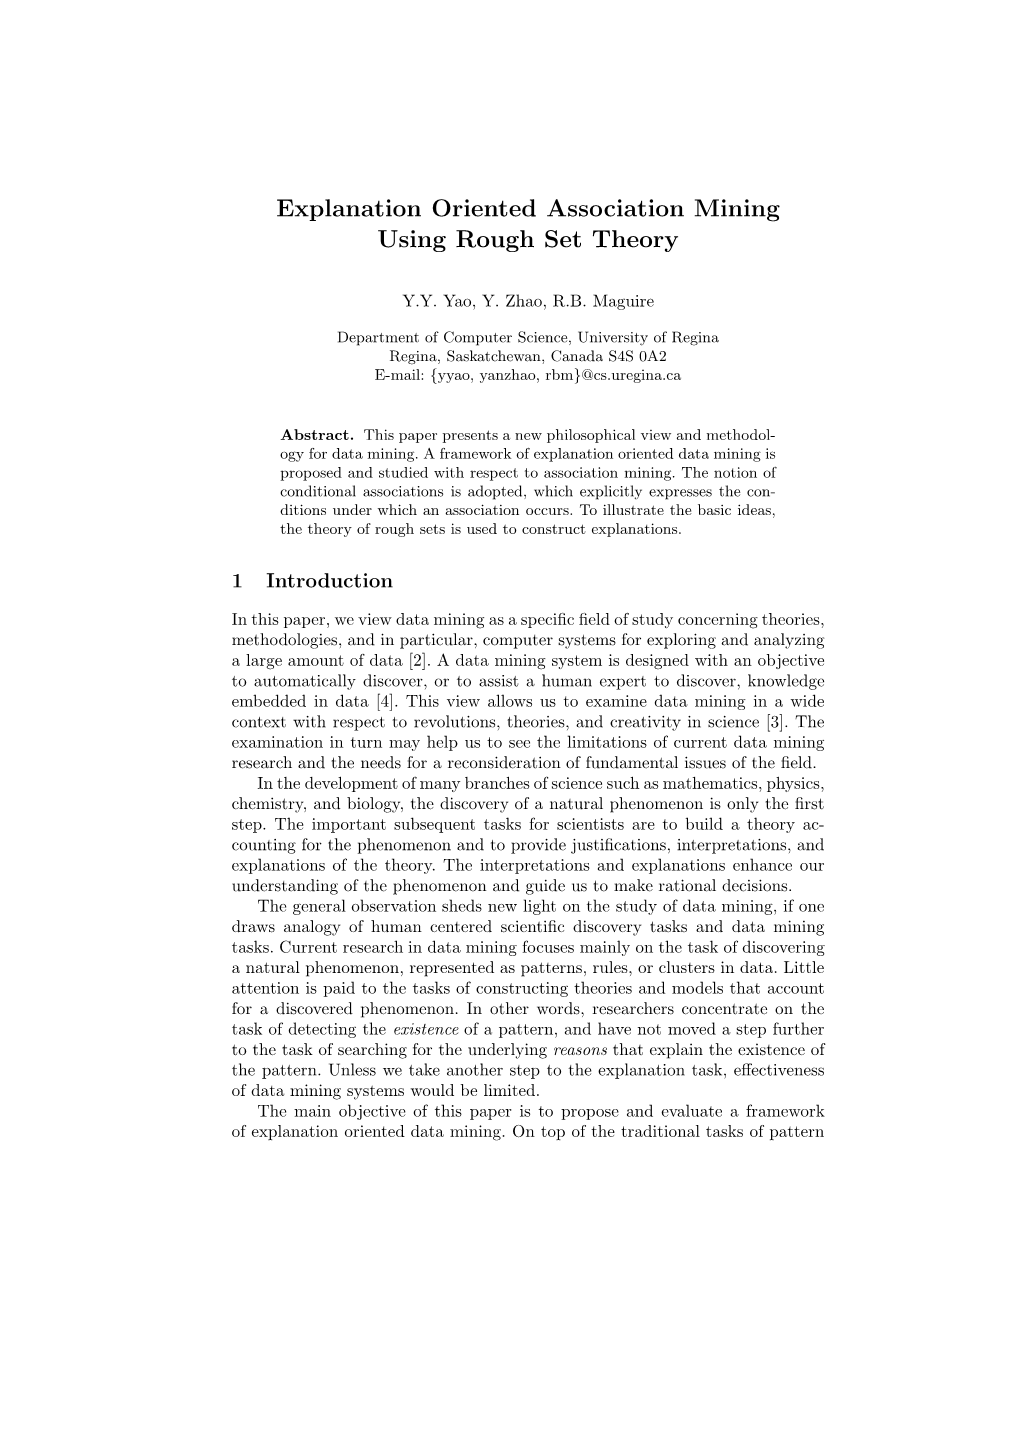 Explanation Oriented Association Mining Using Rough Set Theory